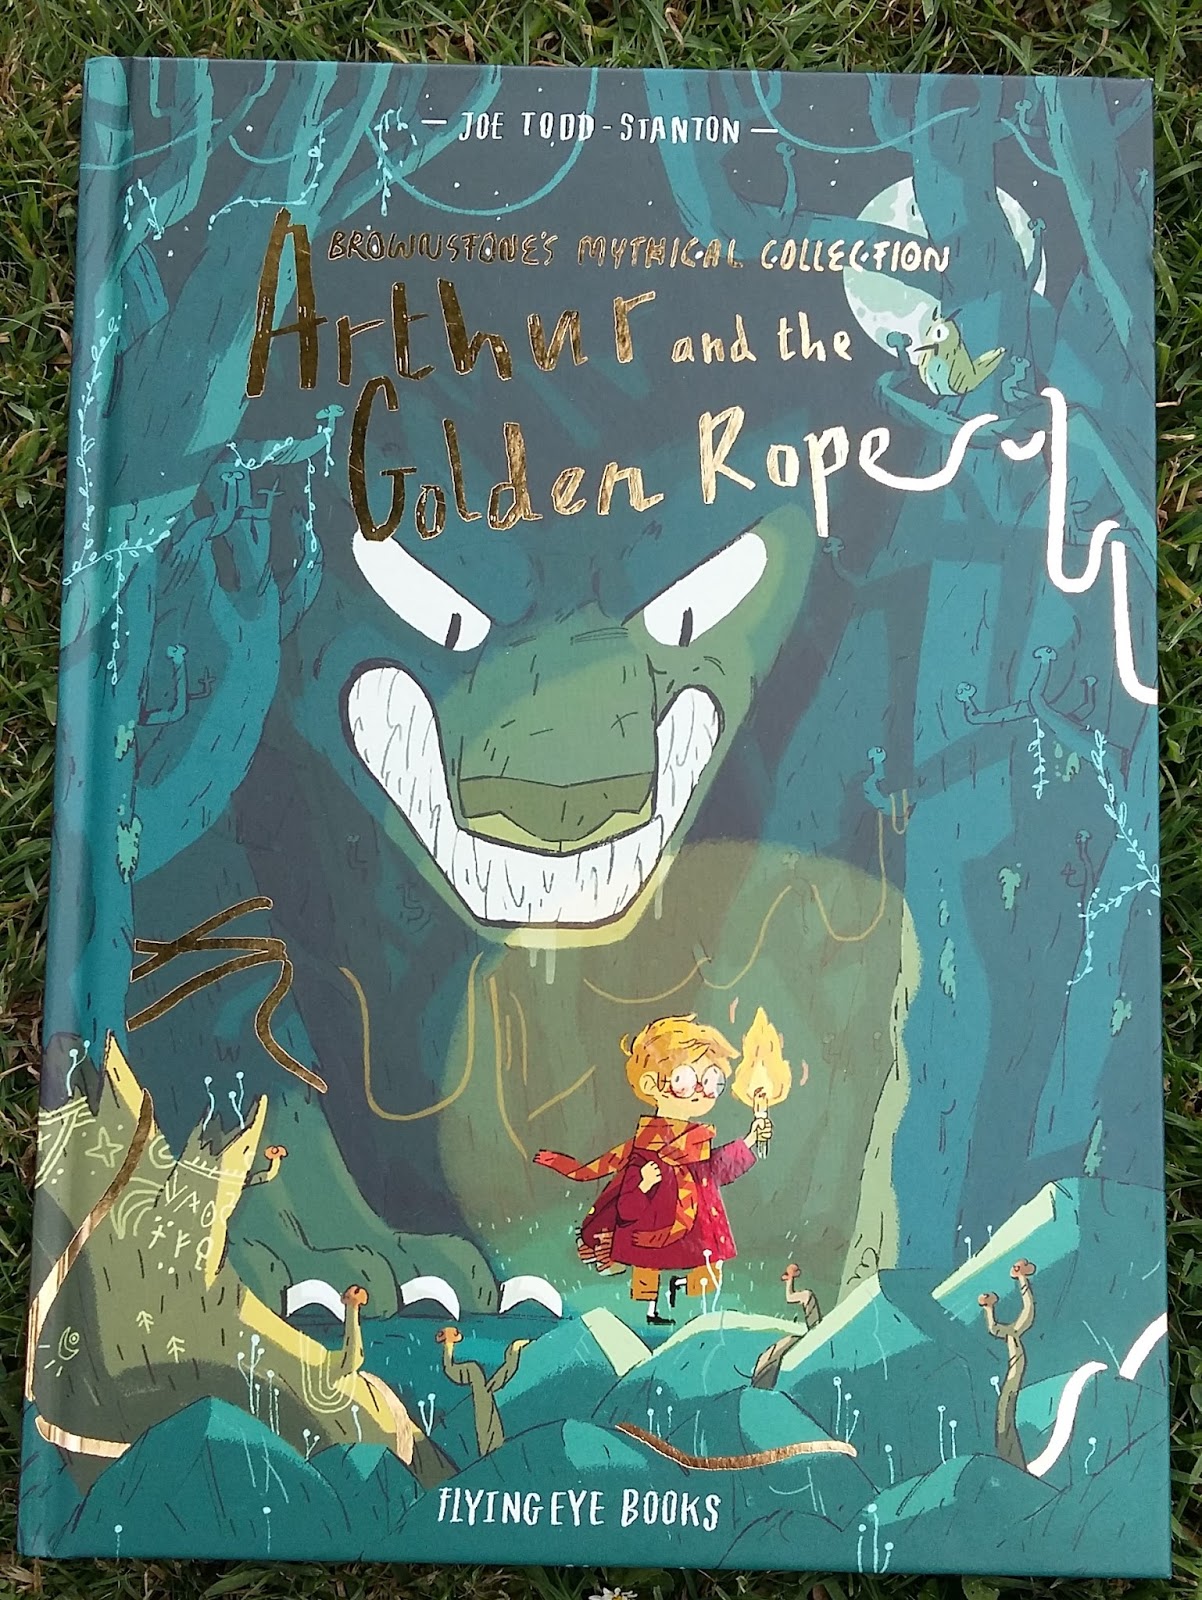 Arthur and the Golden Rope Brownstones Mythical Collection